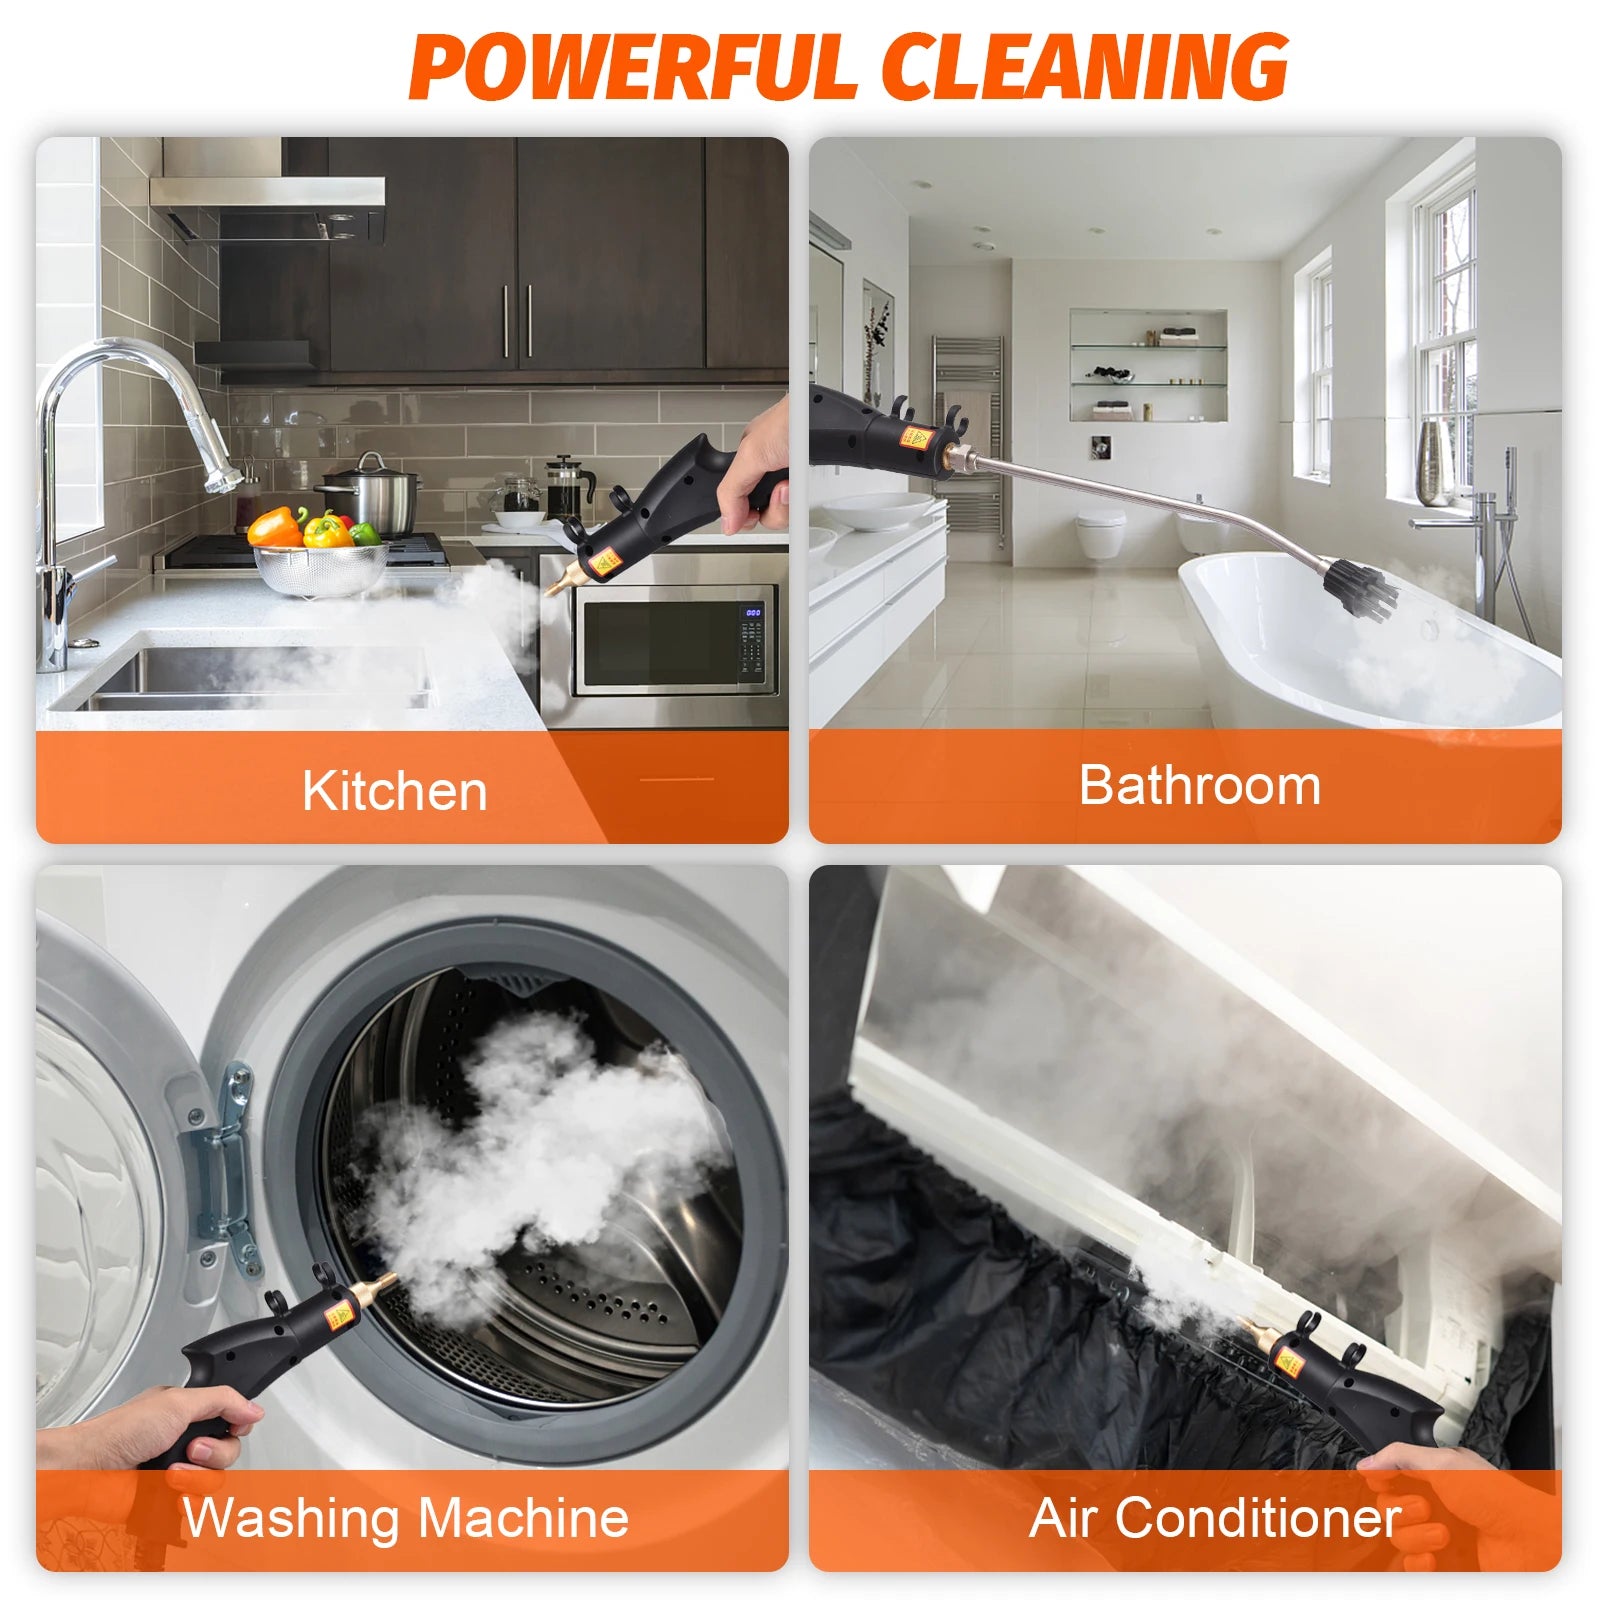 2800W Portable Handheld Steam Cleaner 2L Water Tank High Temperature 3 Bar Pressurized Steam Cleaning Machine with Brush Heads